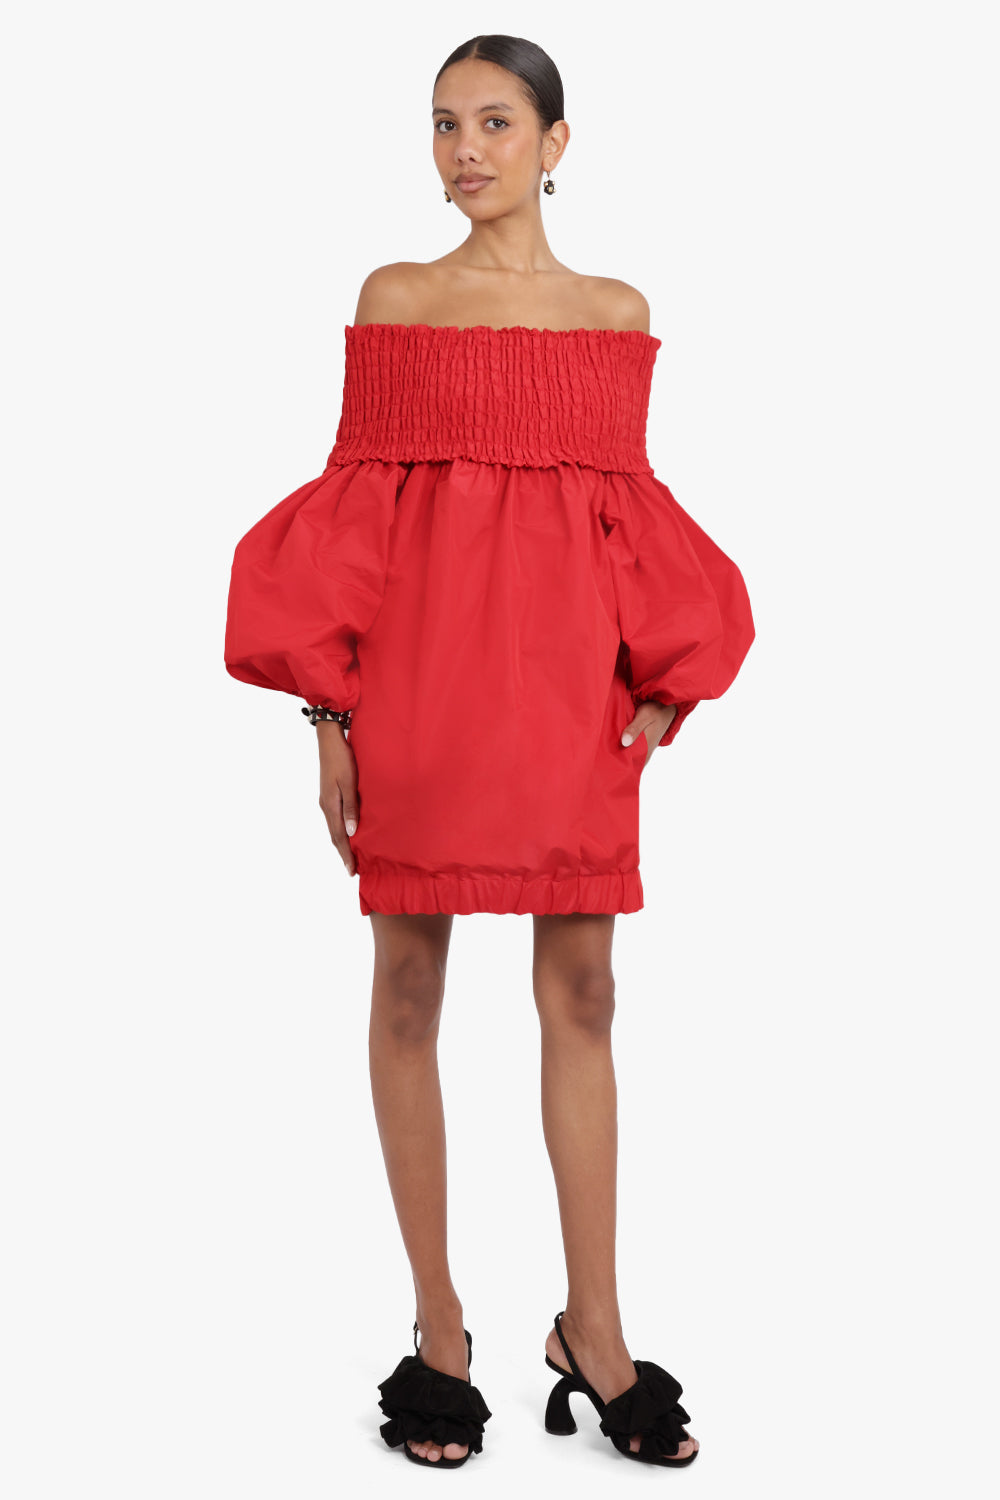 PATOU RTW Off-the-Shoulder Smock Mini Dress in Eco-friendly Faille | Lipstick Red